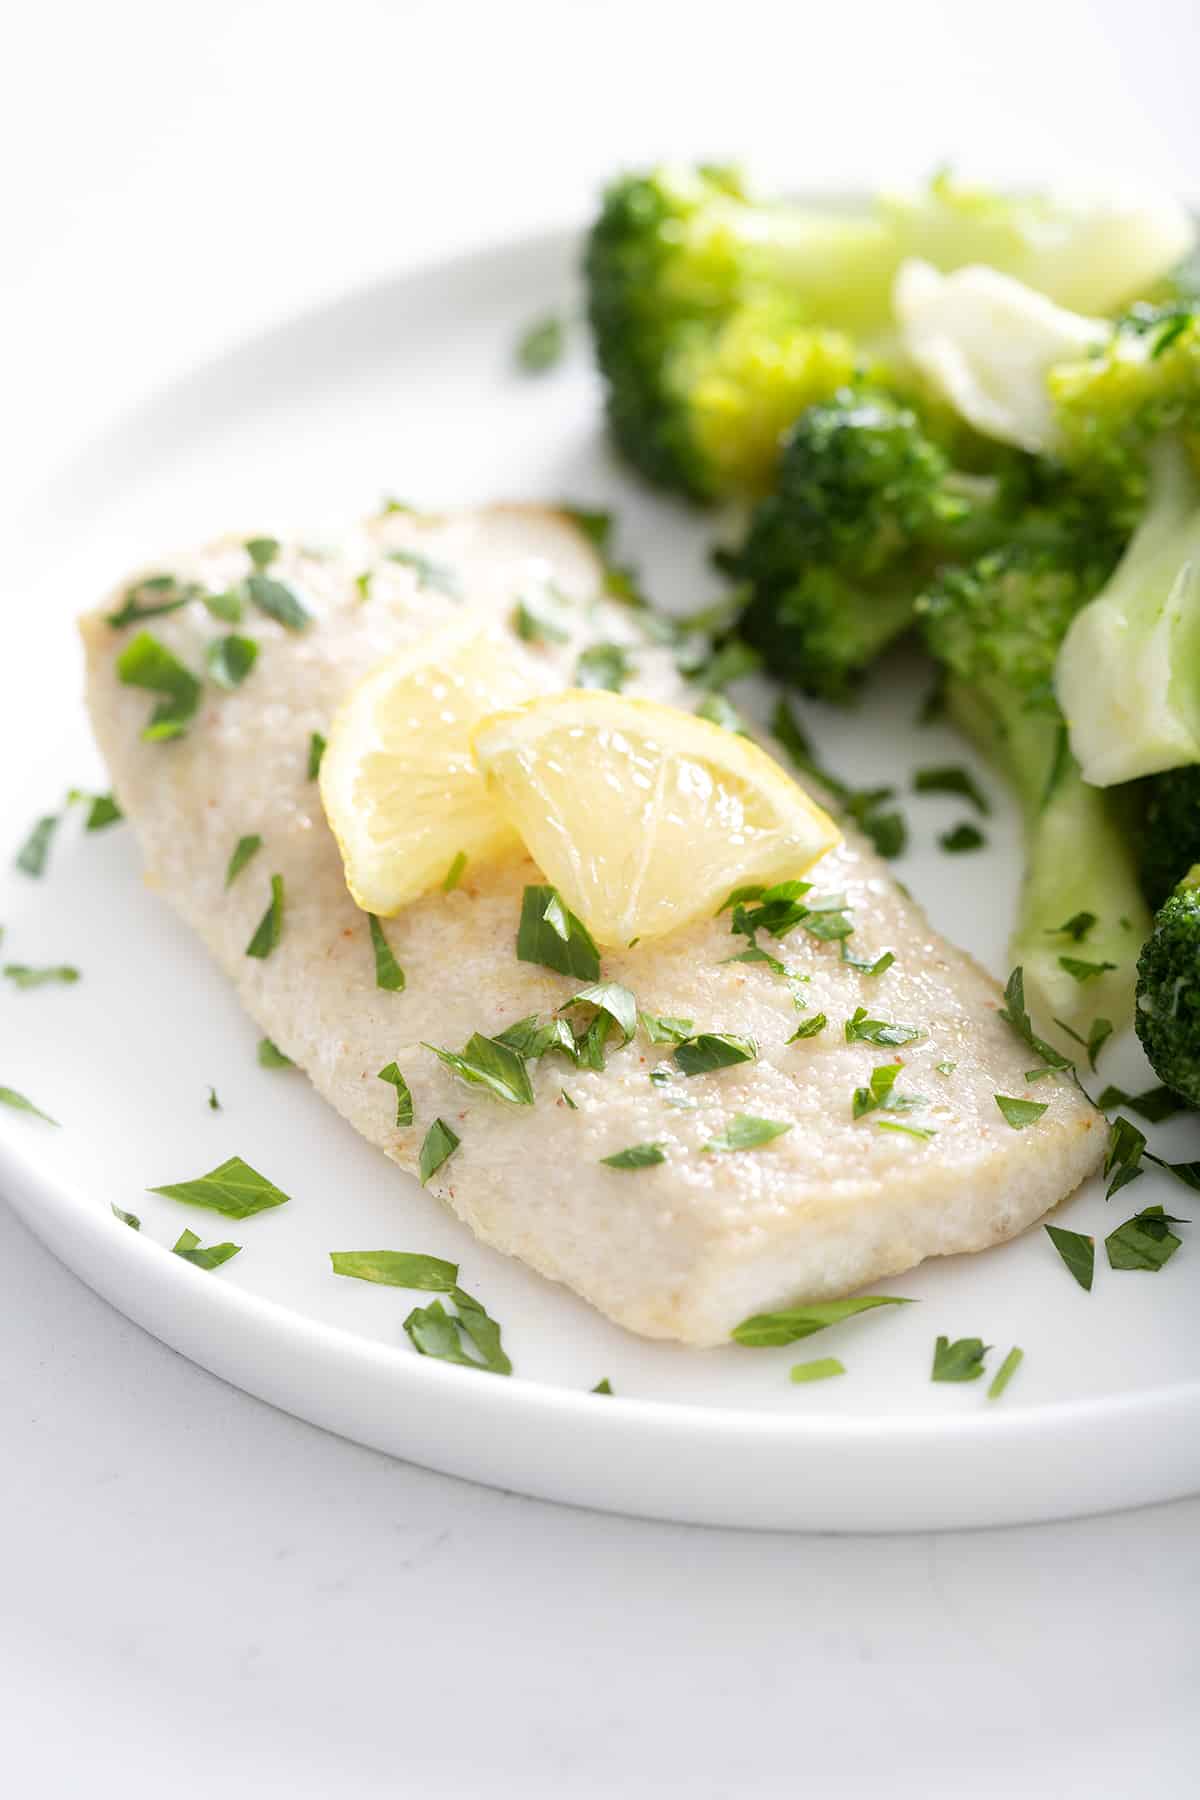 halibut fillet with parsley and lemon slices on plate with broccoli